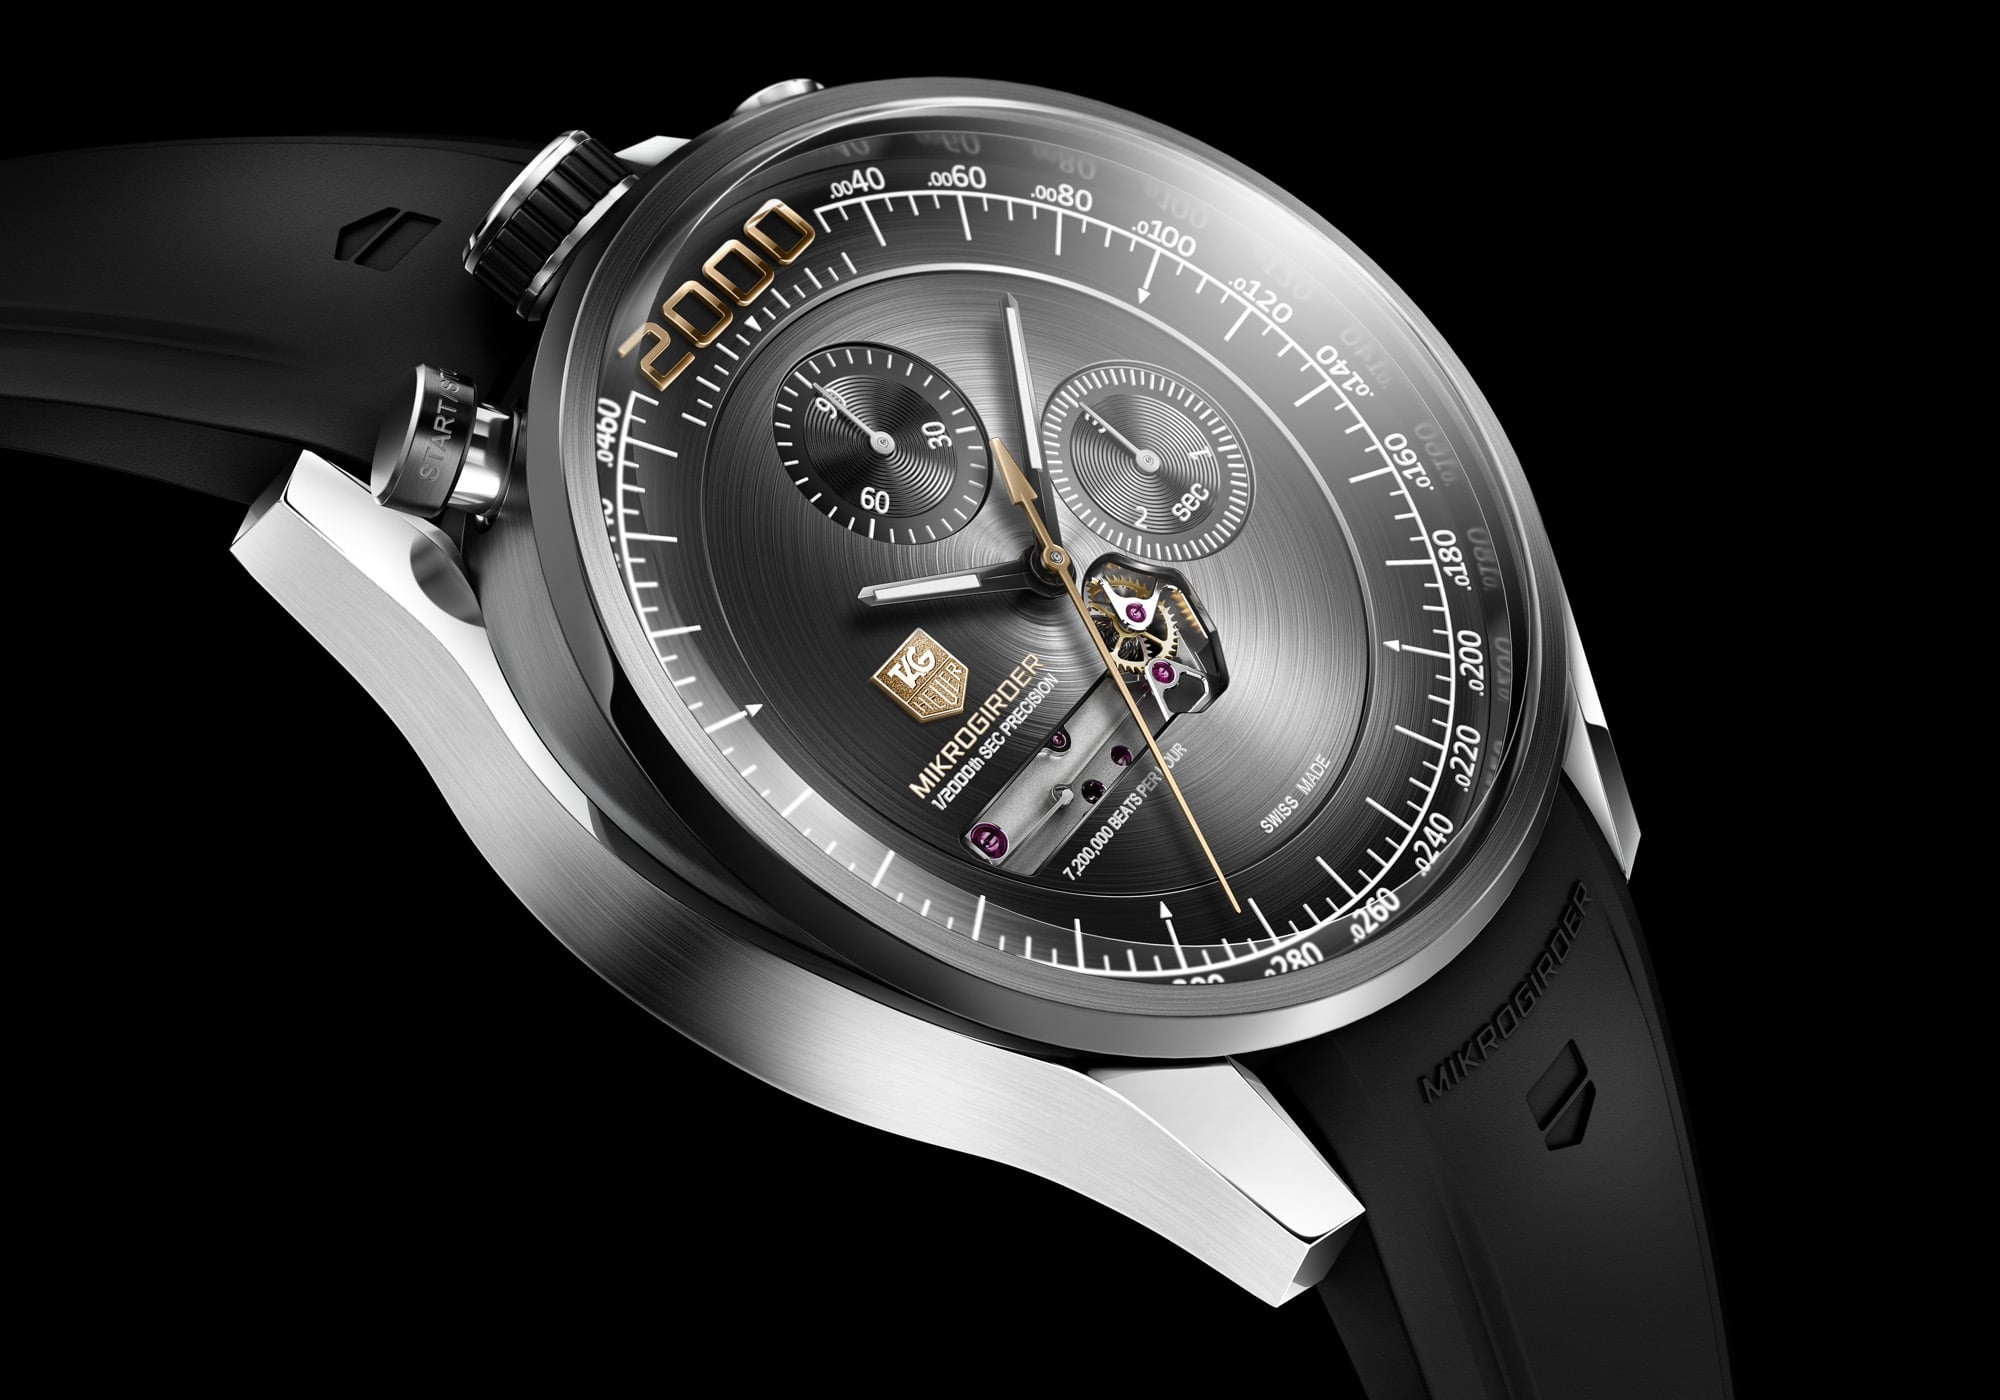 Chronongraph watches by TAG Heuer